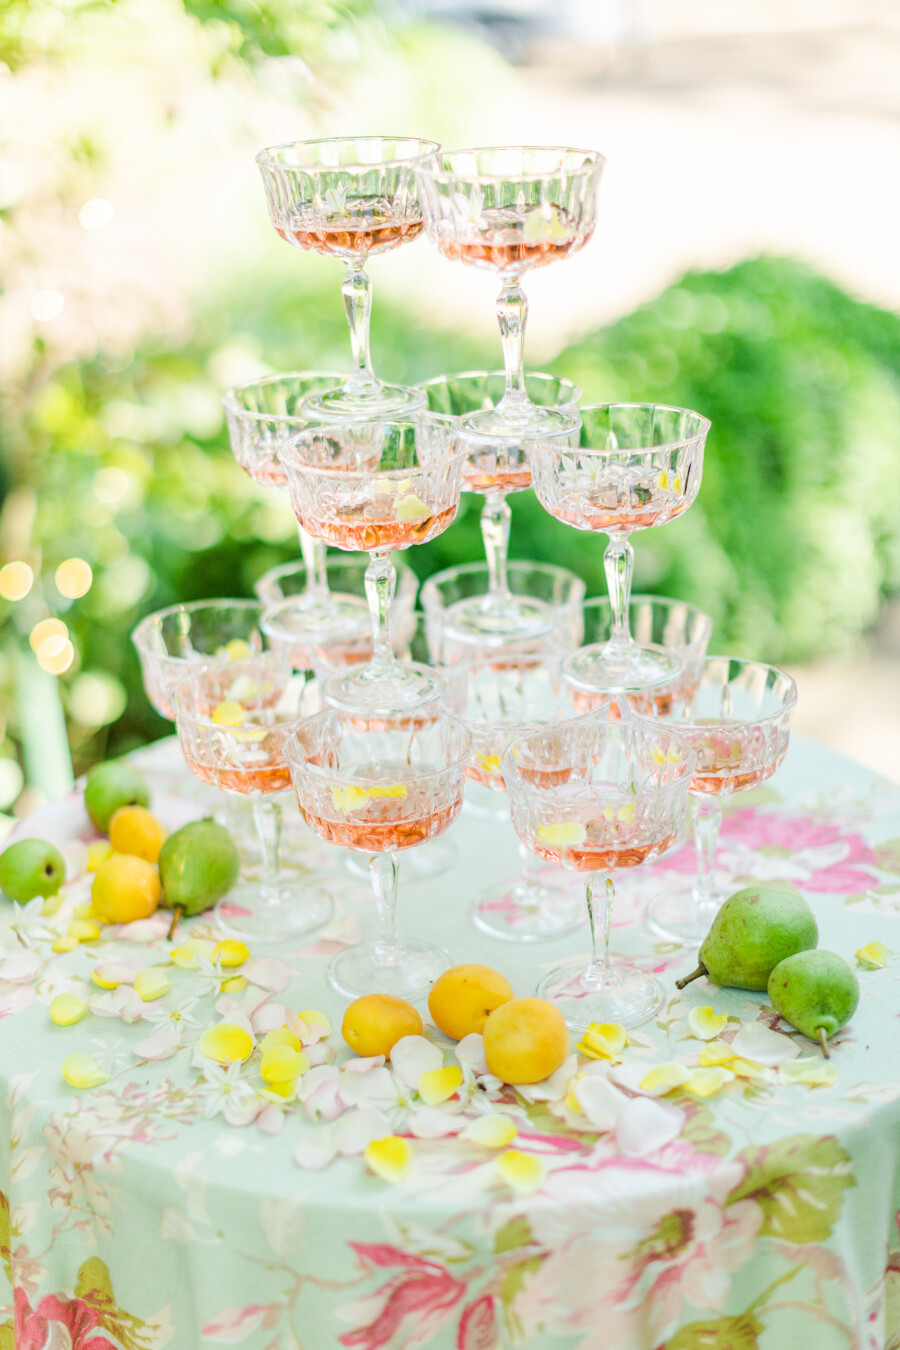 Riverwood Mansion Inspired Wedding with Bright Colors